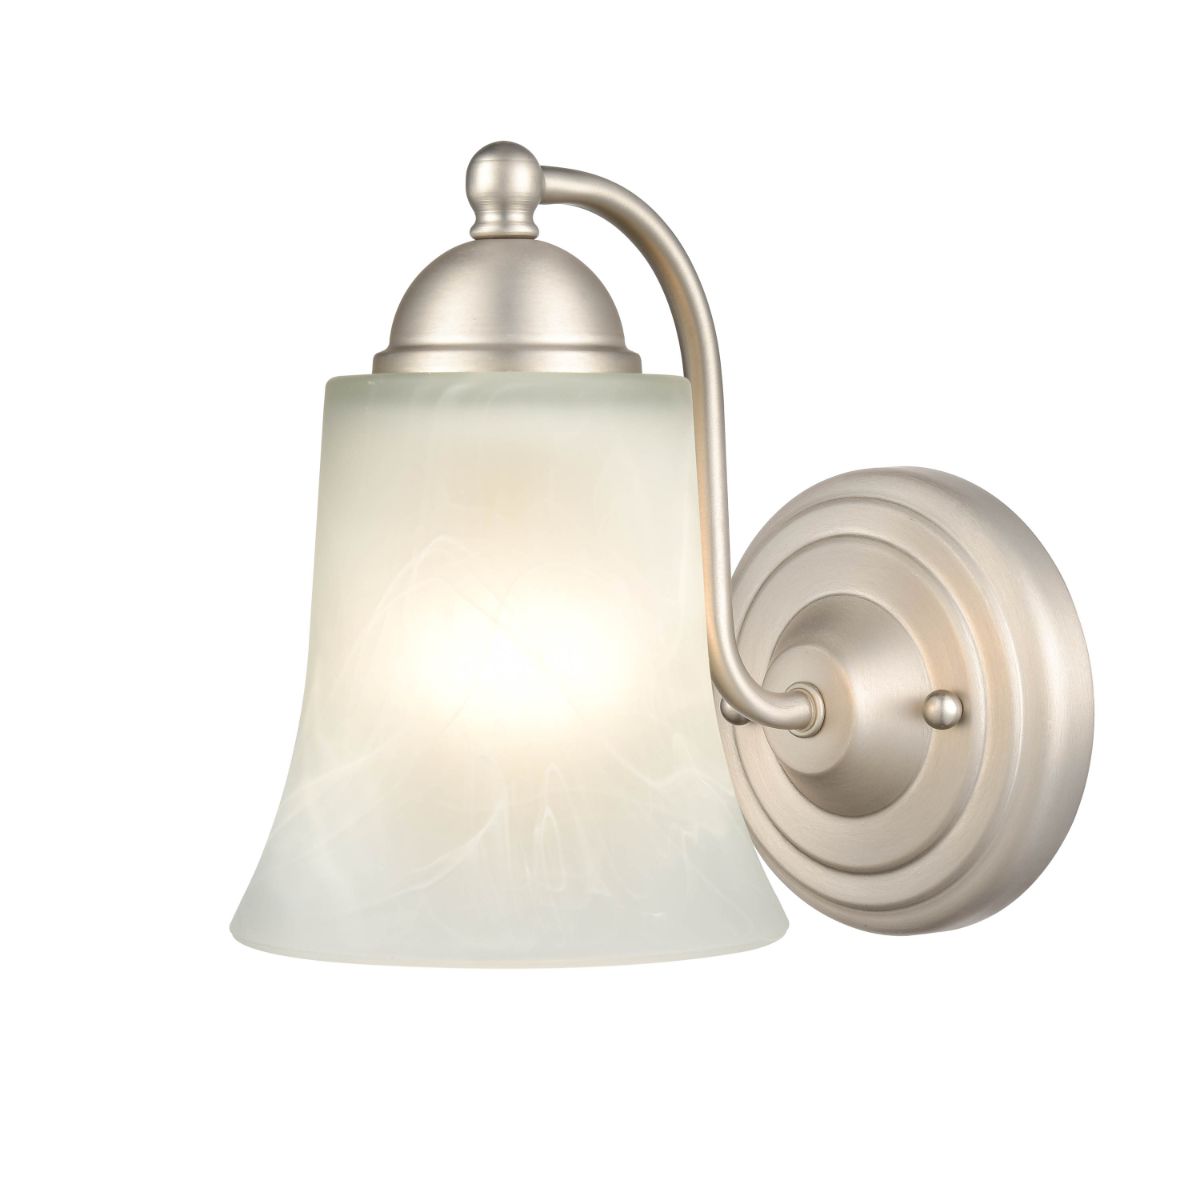 8 in. Armed Sconce Nickel finish